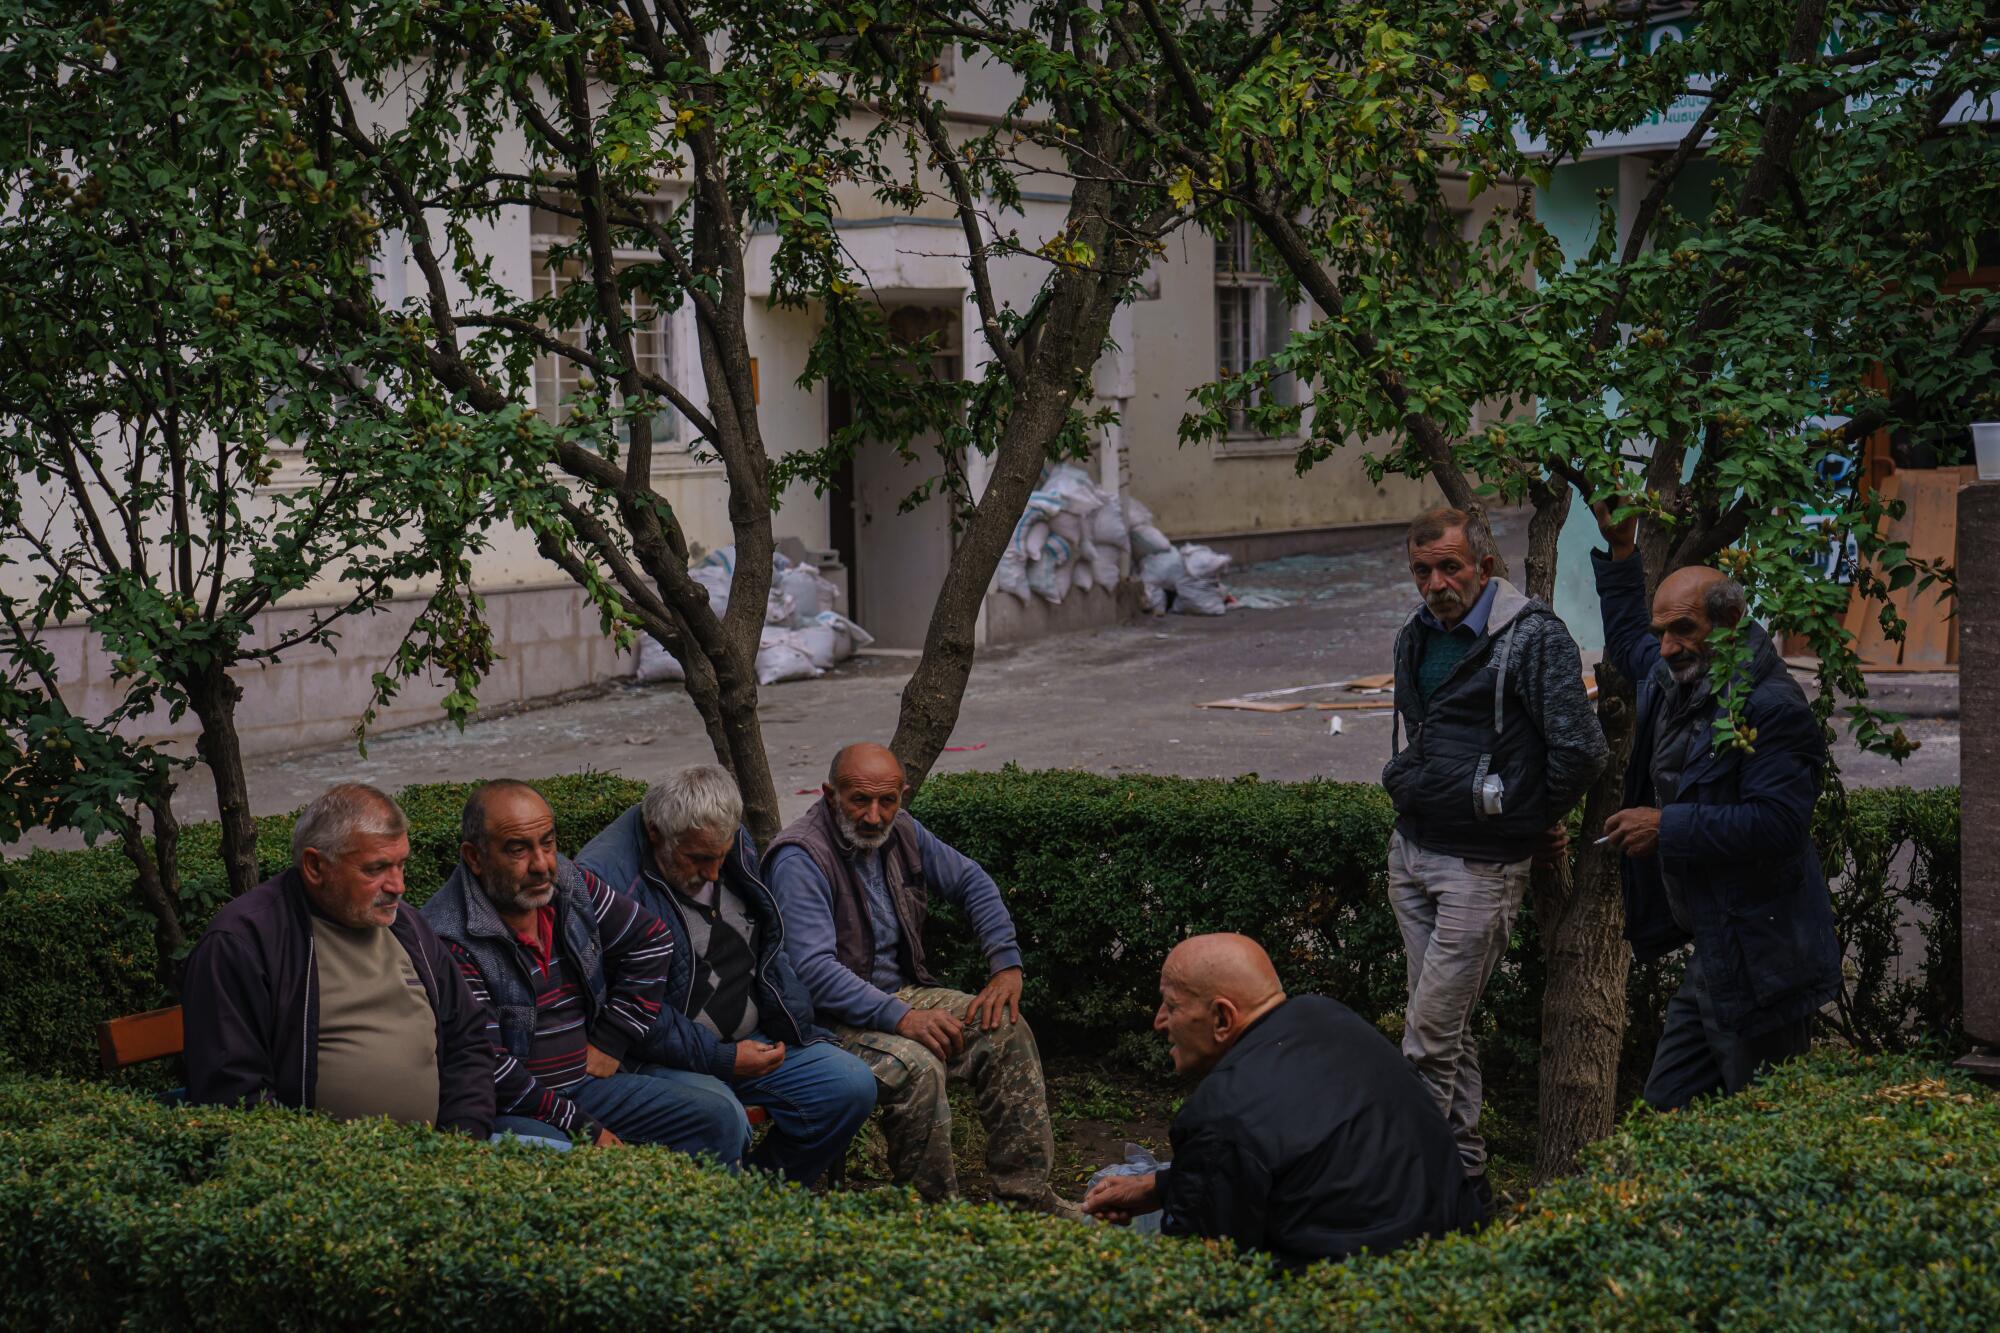 Men gather around to smoke and chat near a telecom company in Stepanakert.